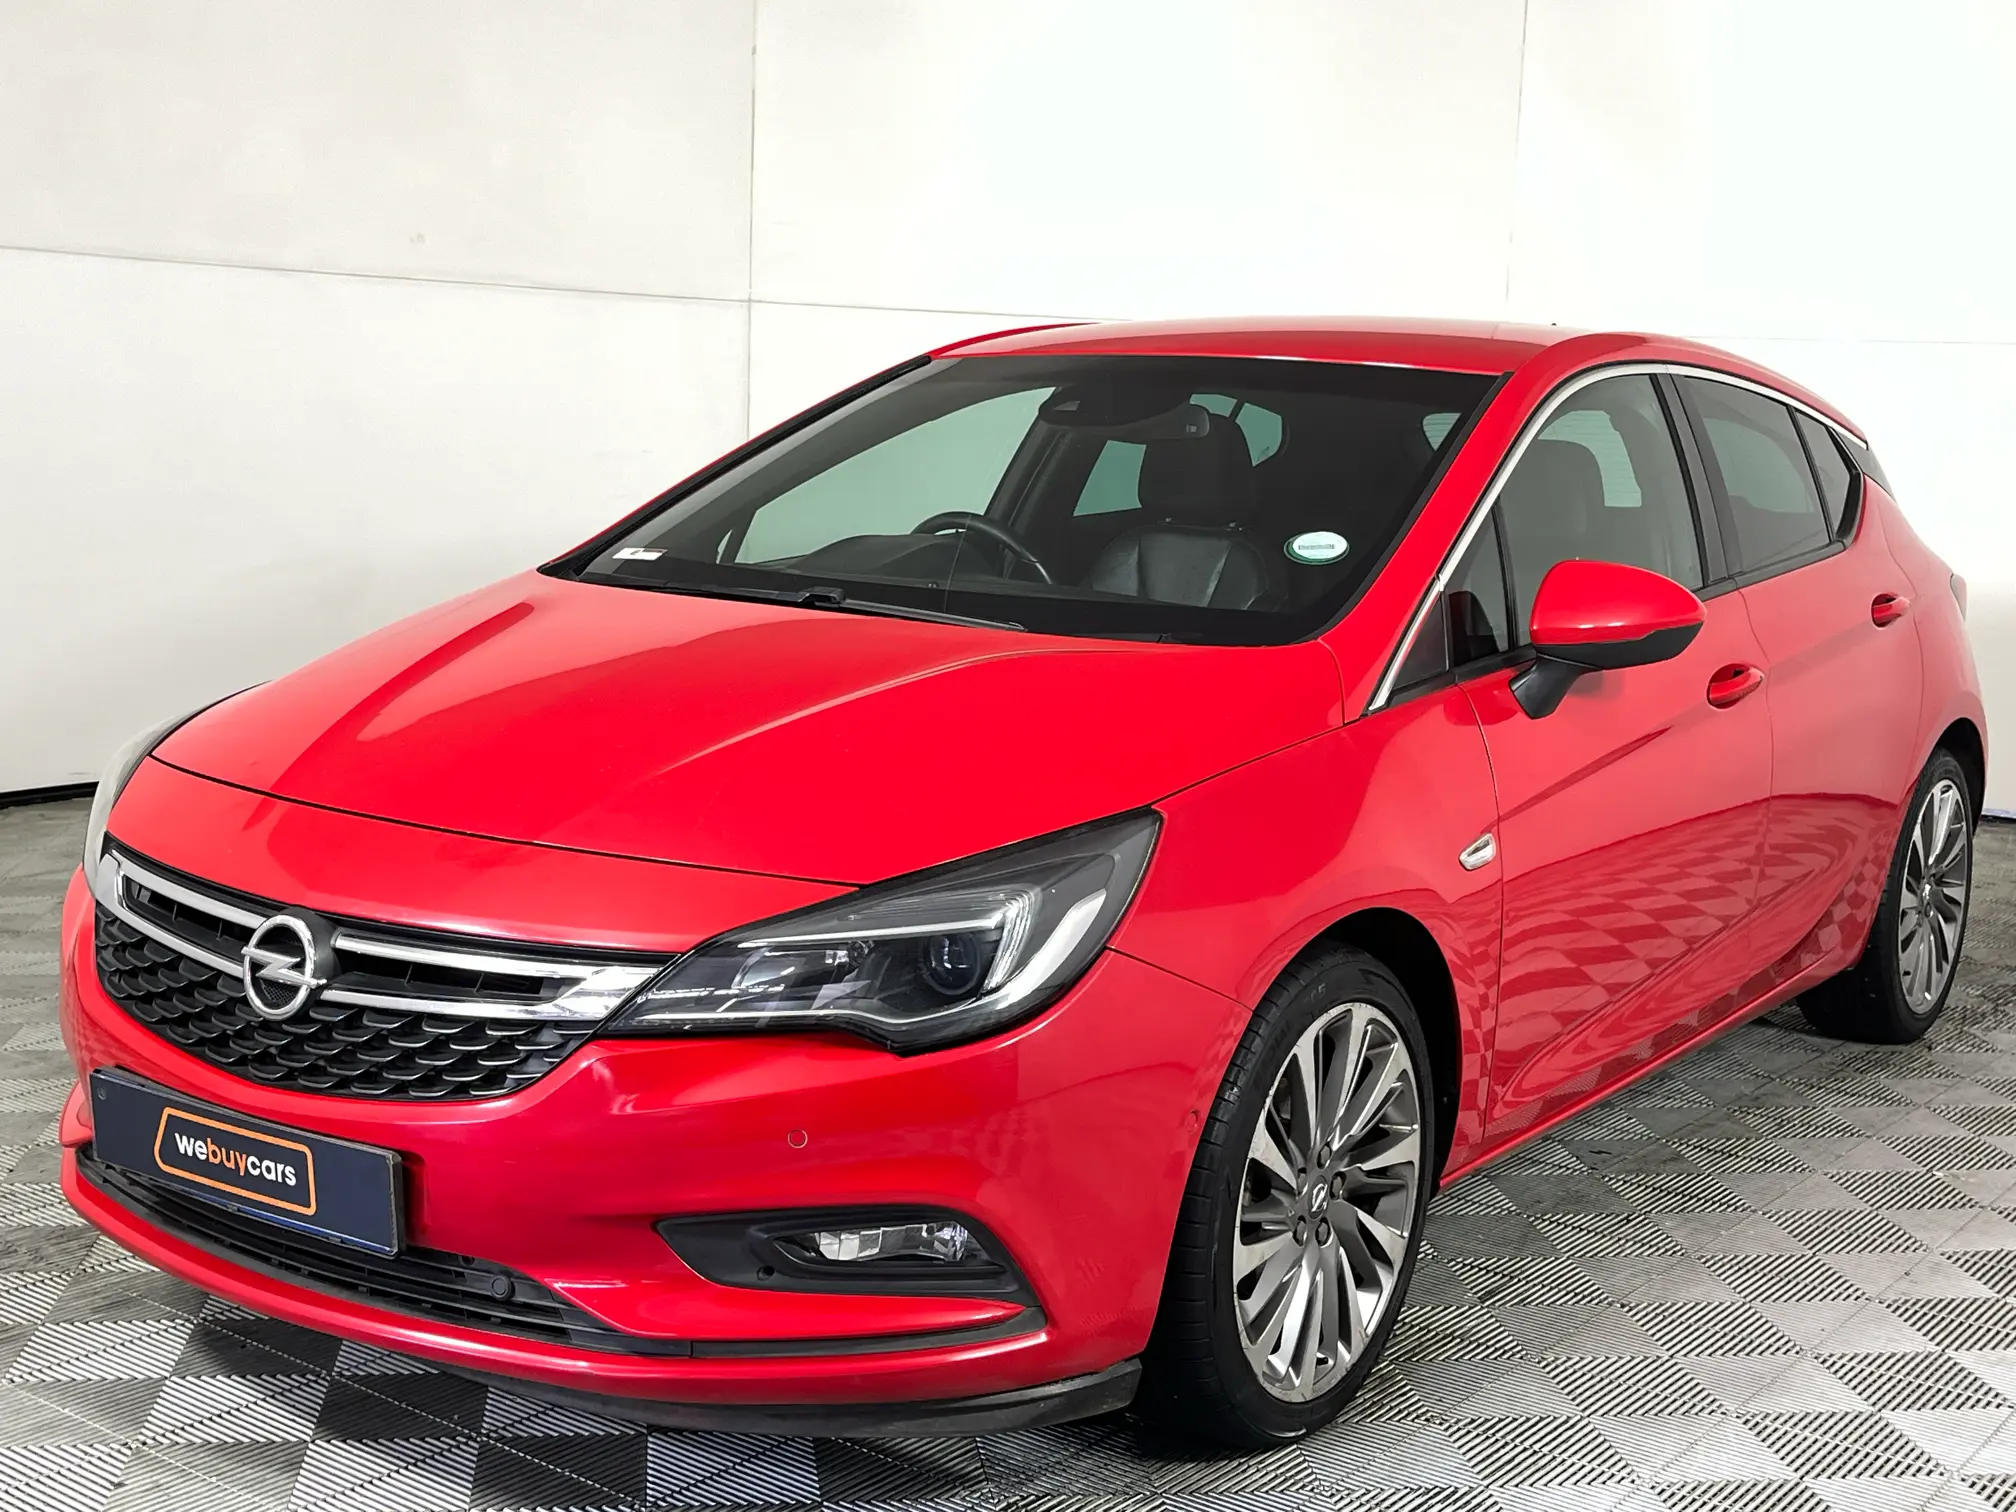 2016 Opel Astra 1.4T Sport Auto (5dr)